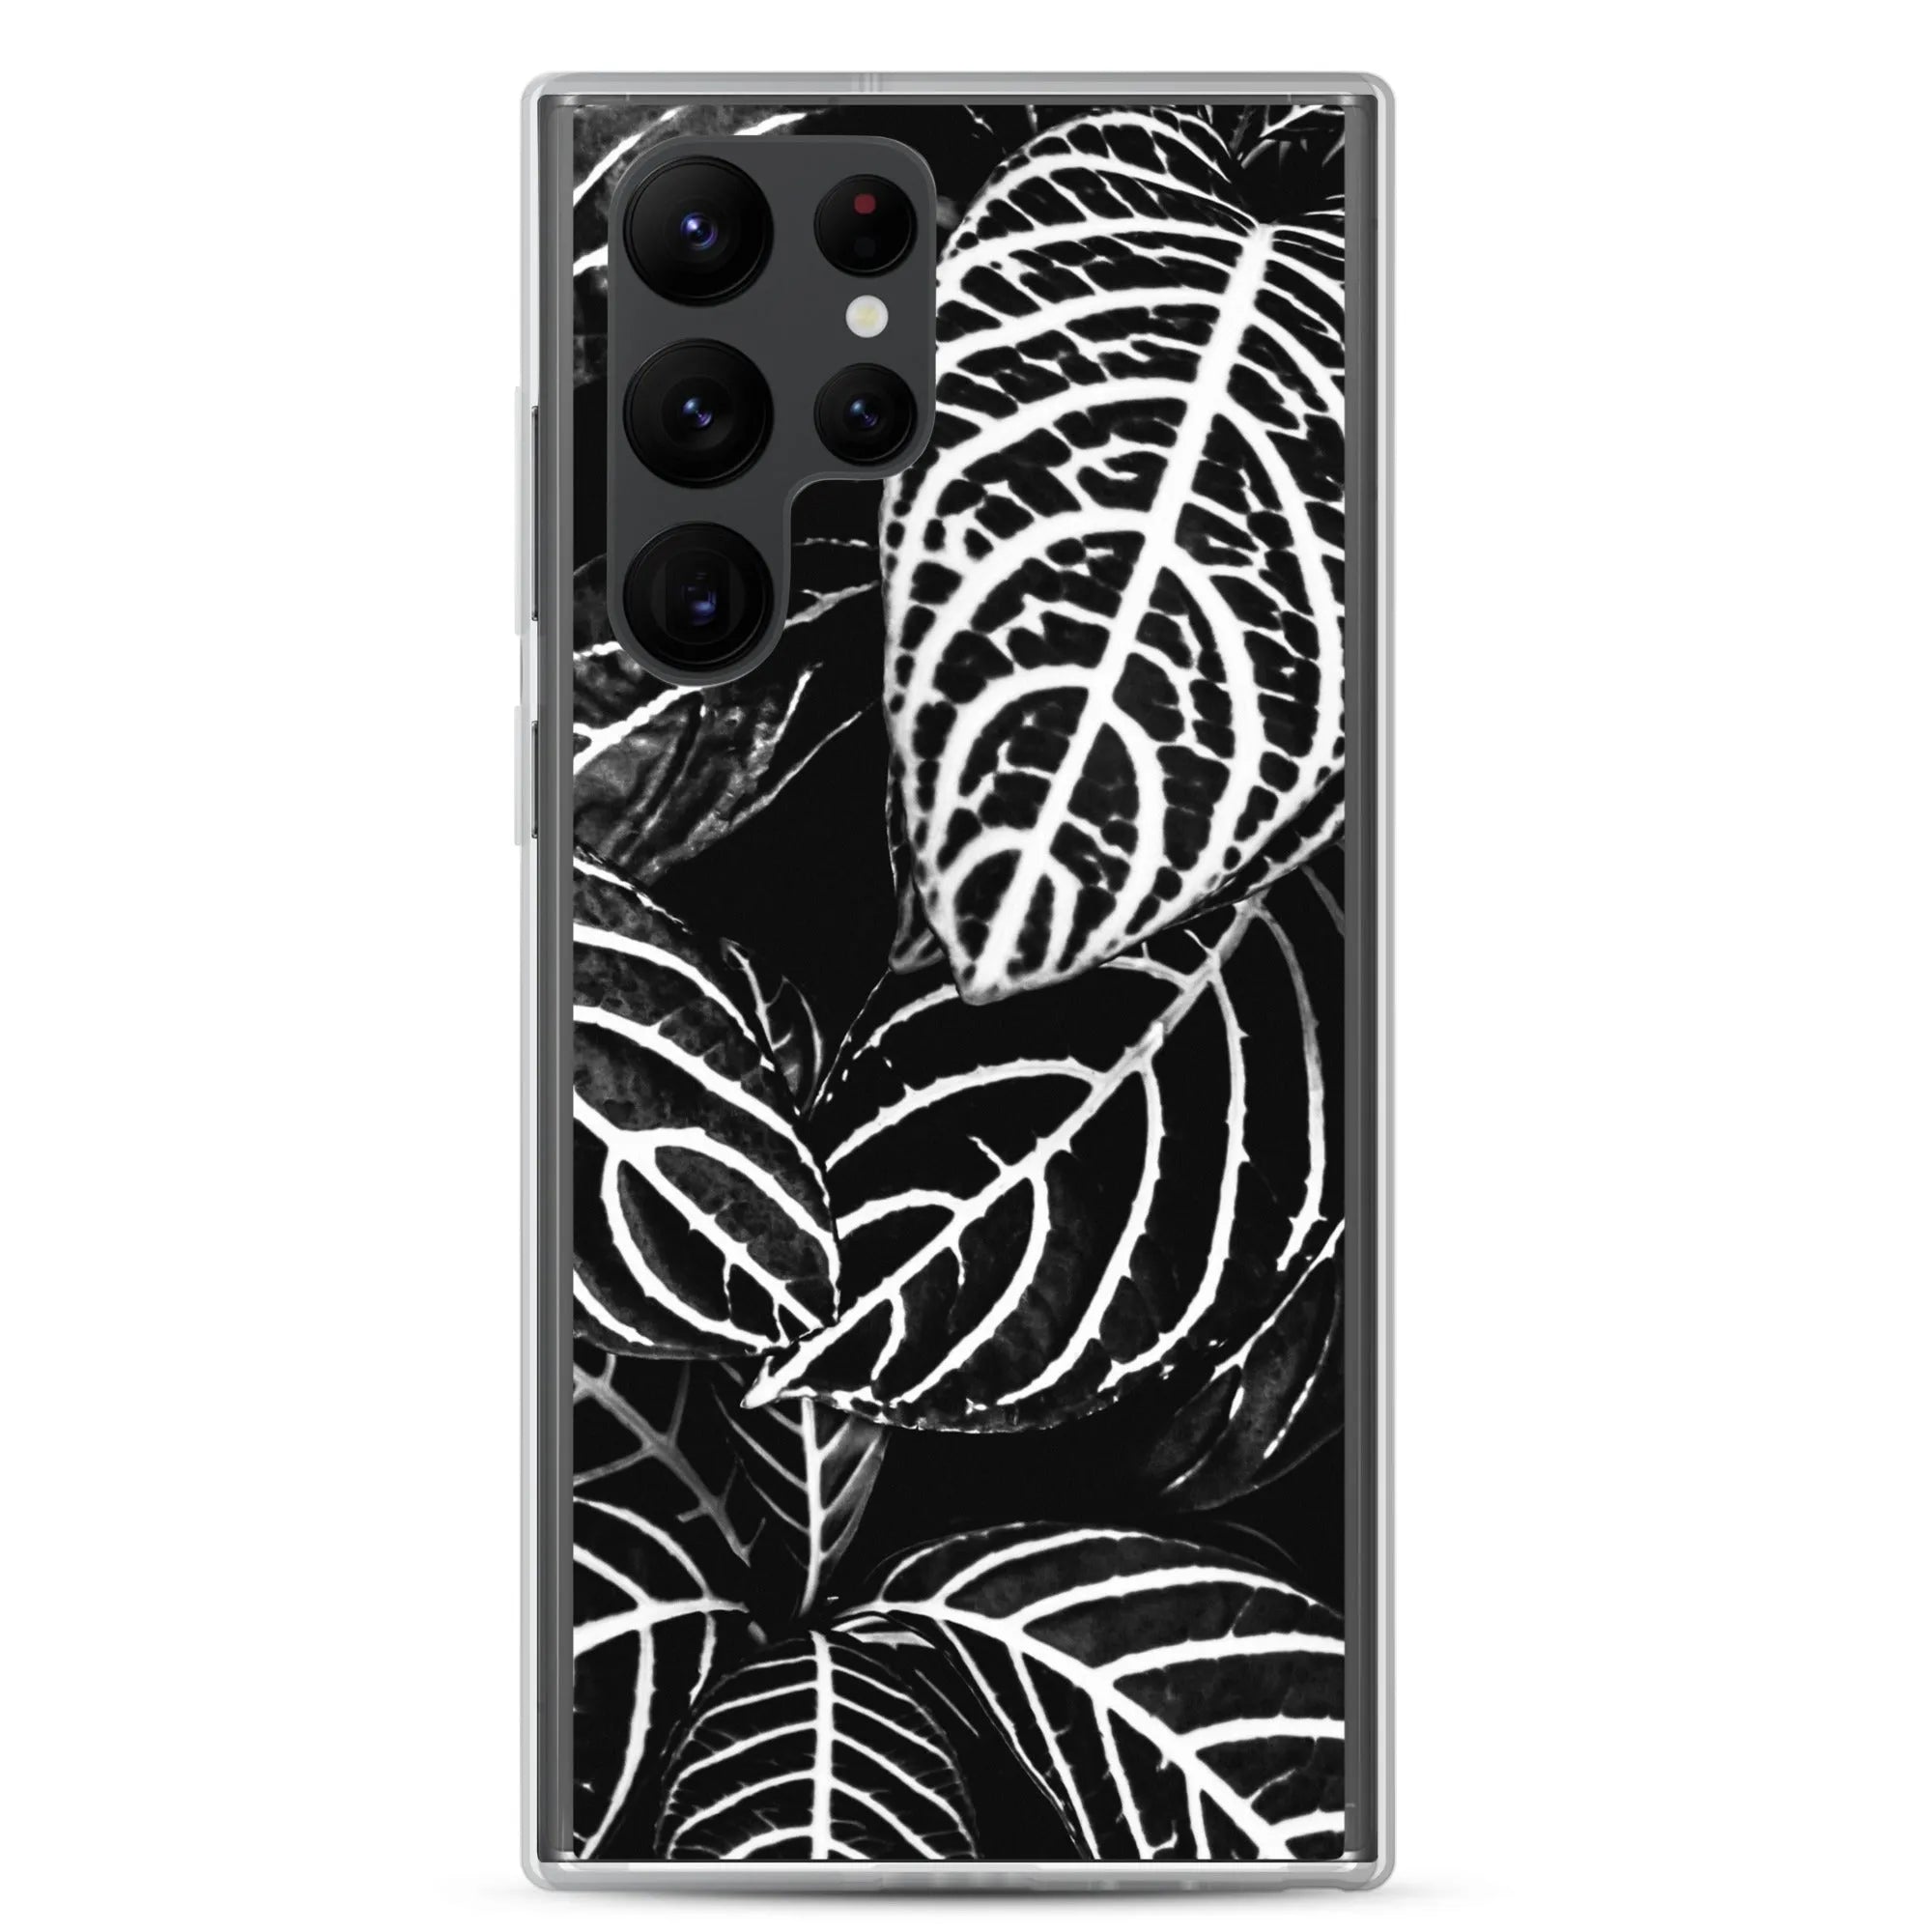 Just The Headlines Samsung Galaxy Case - Black And White - Samsung Galaxy S22 Ultra - Mobile Phone Cases - Aesthetic Art